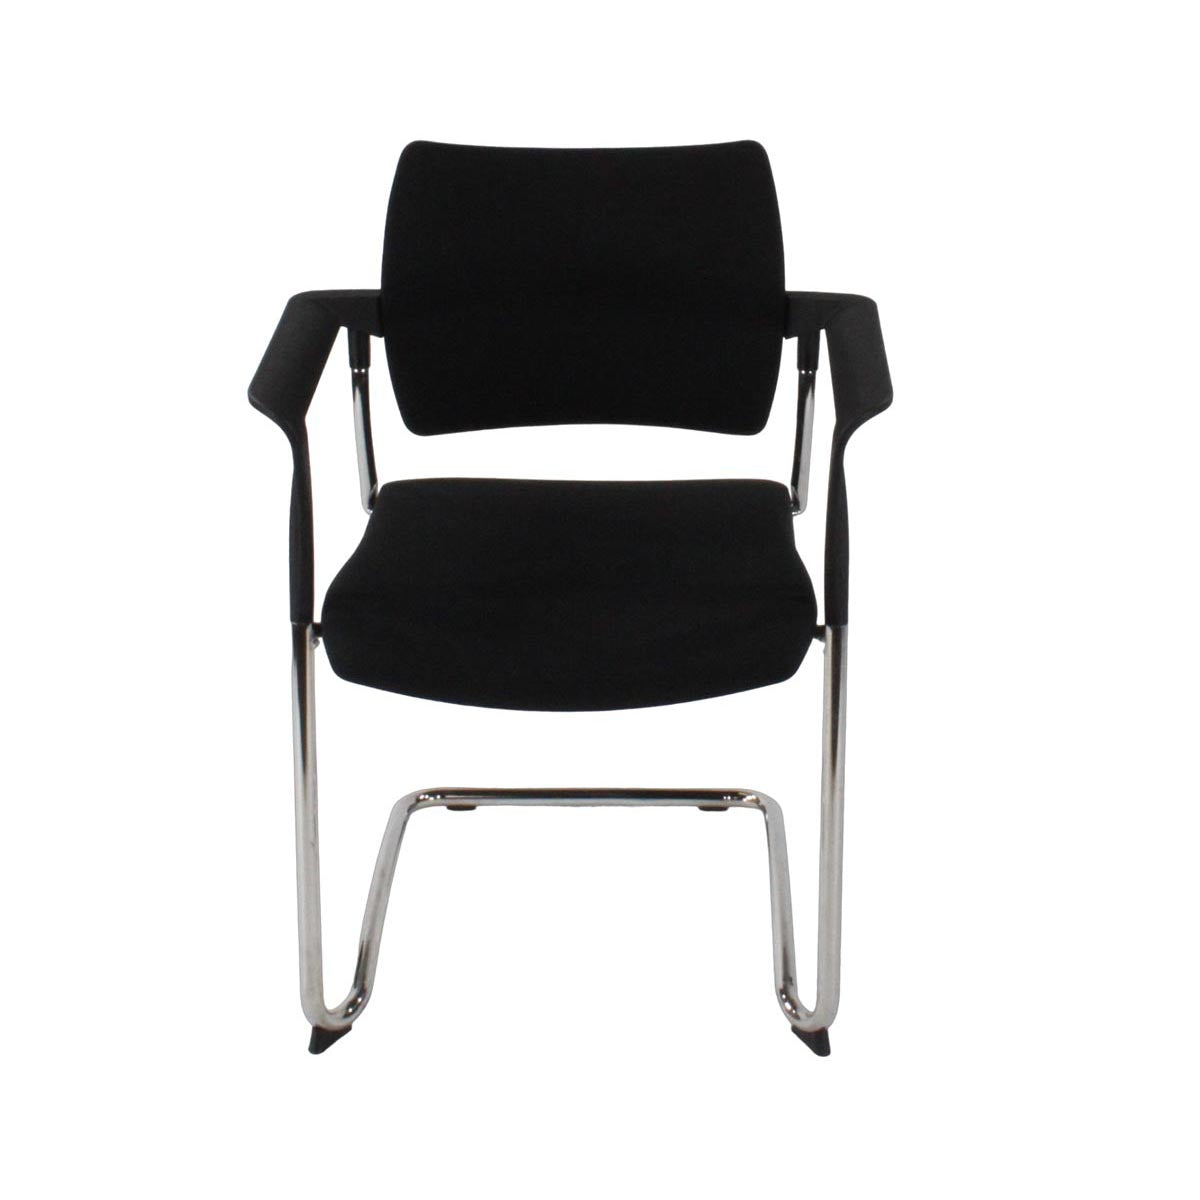 Boss Design: Dream Cantilever Conference Chair - Refurbished